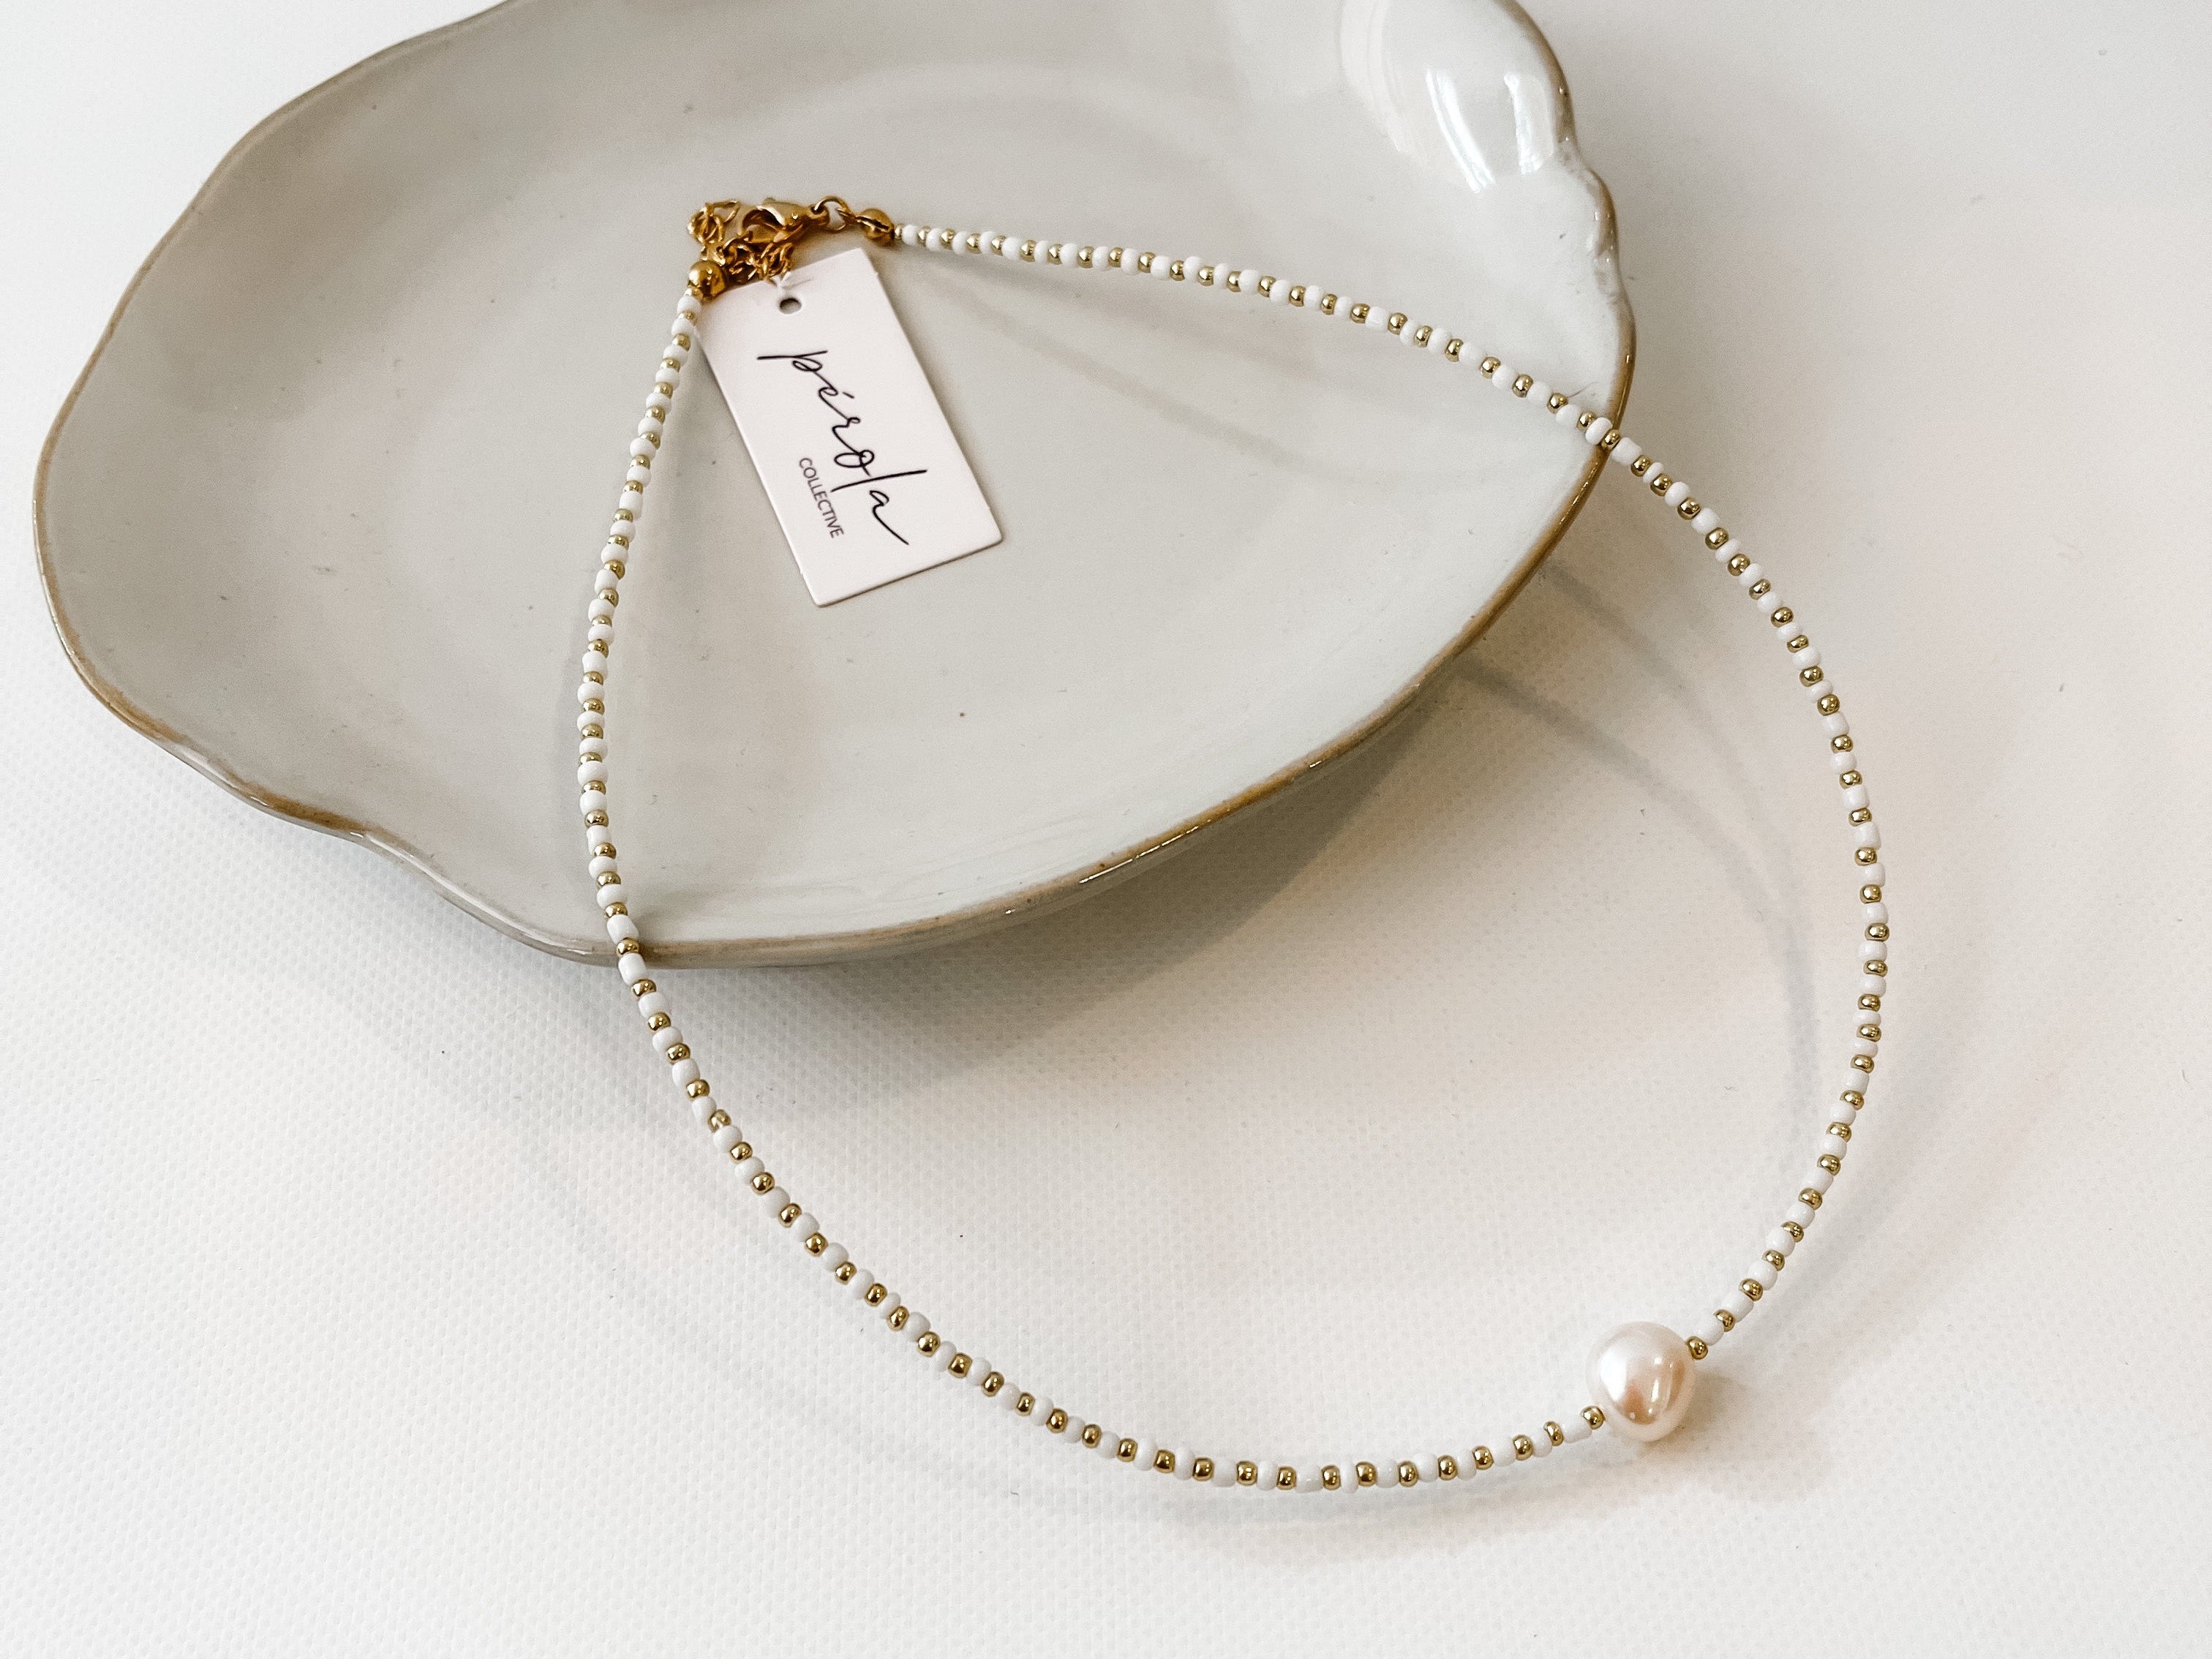 White & Gold Beaded Necklace with Freshwater Pearl-Perola Collective-Lot 39 Store & Cafe